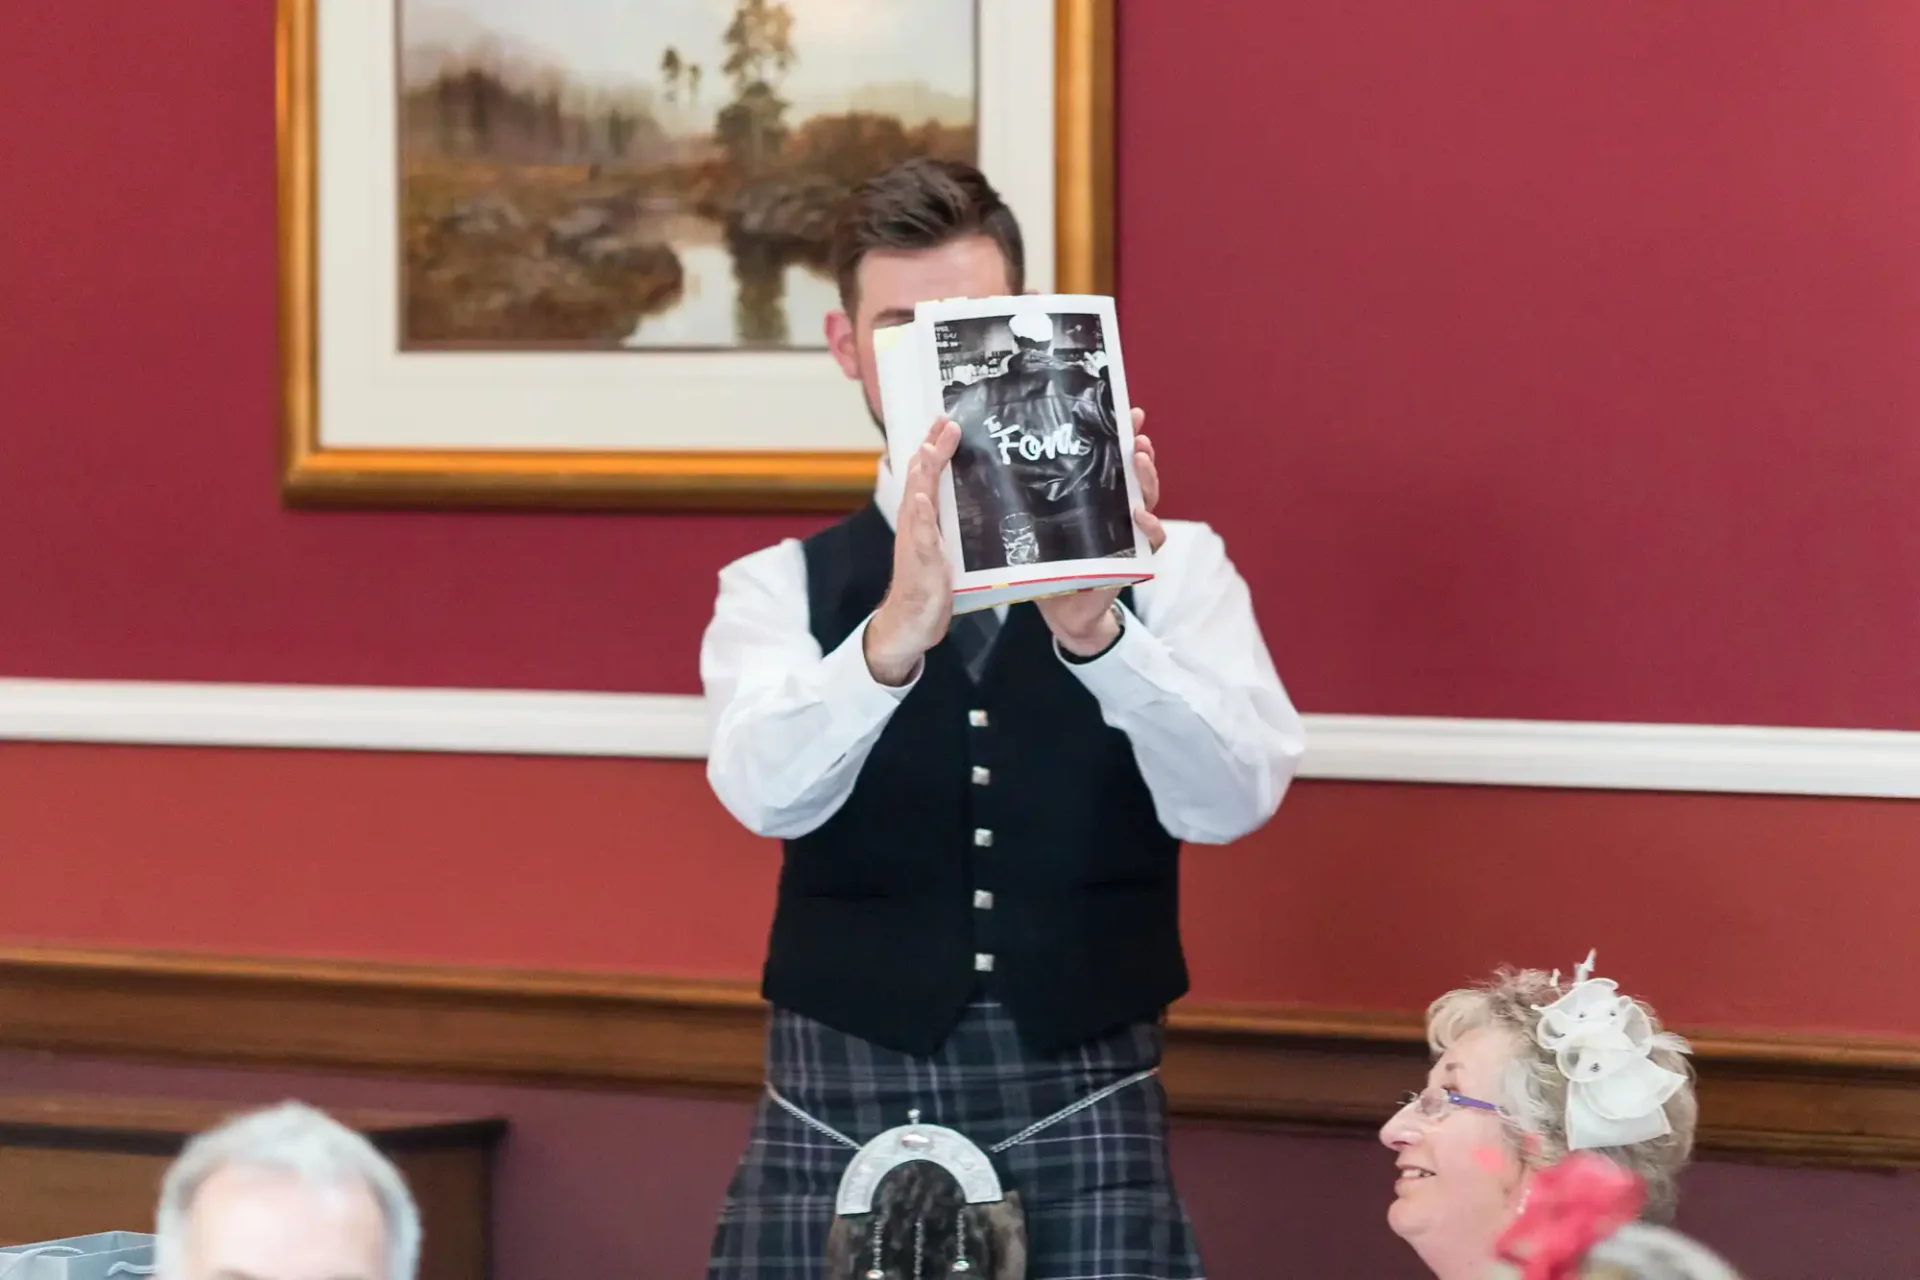 A man in a vest and kilt holding a book in front of his face, standing in a room with people and paintings in the background.